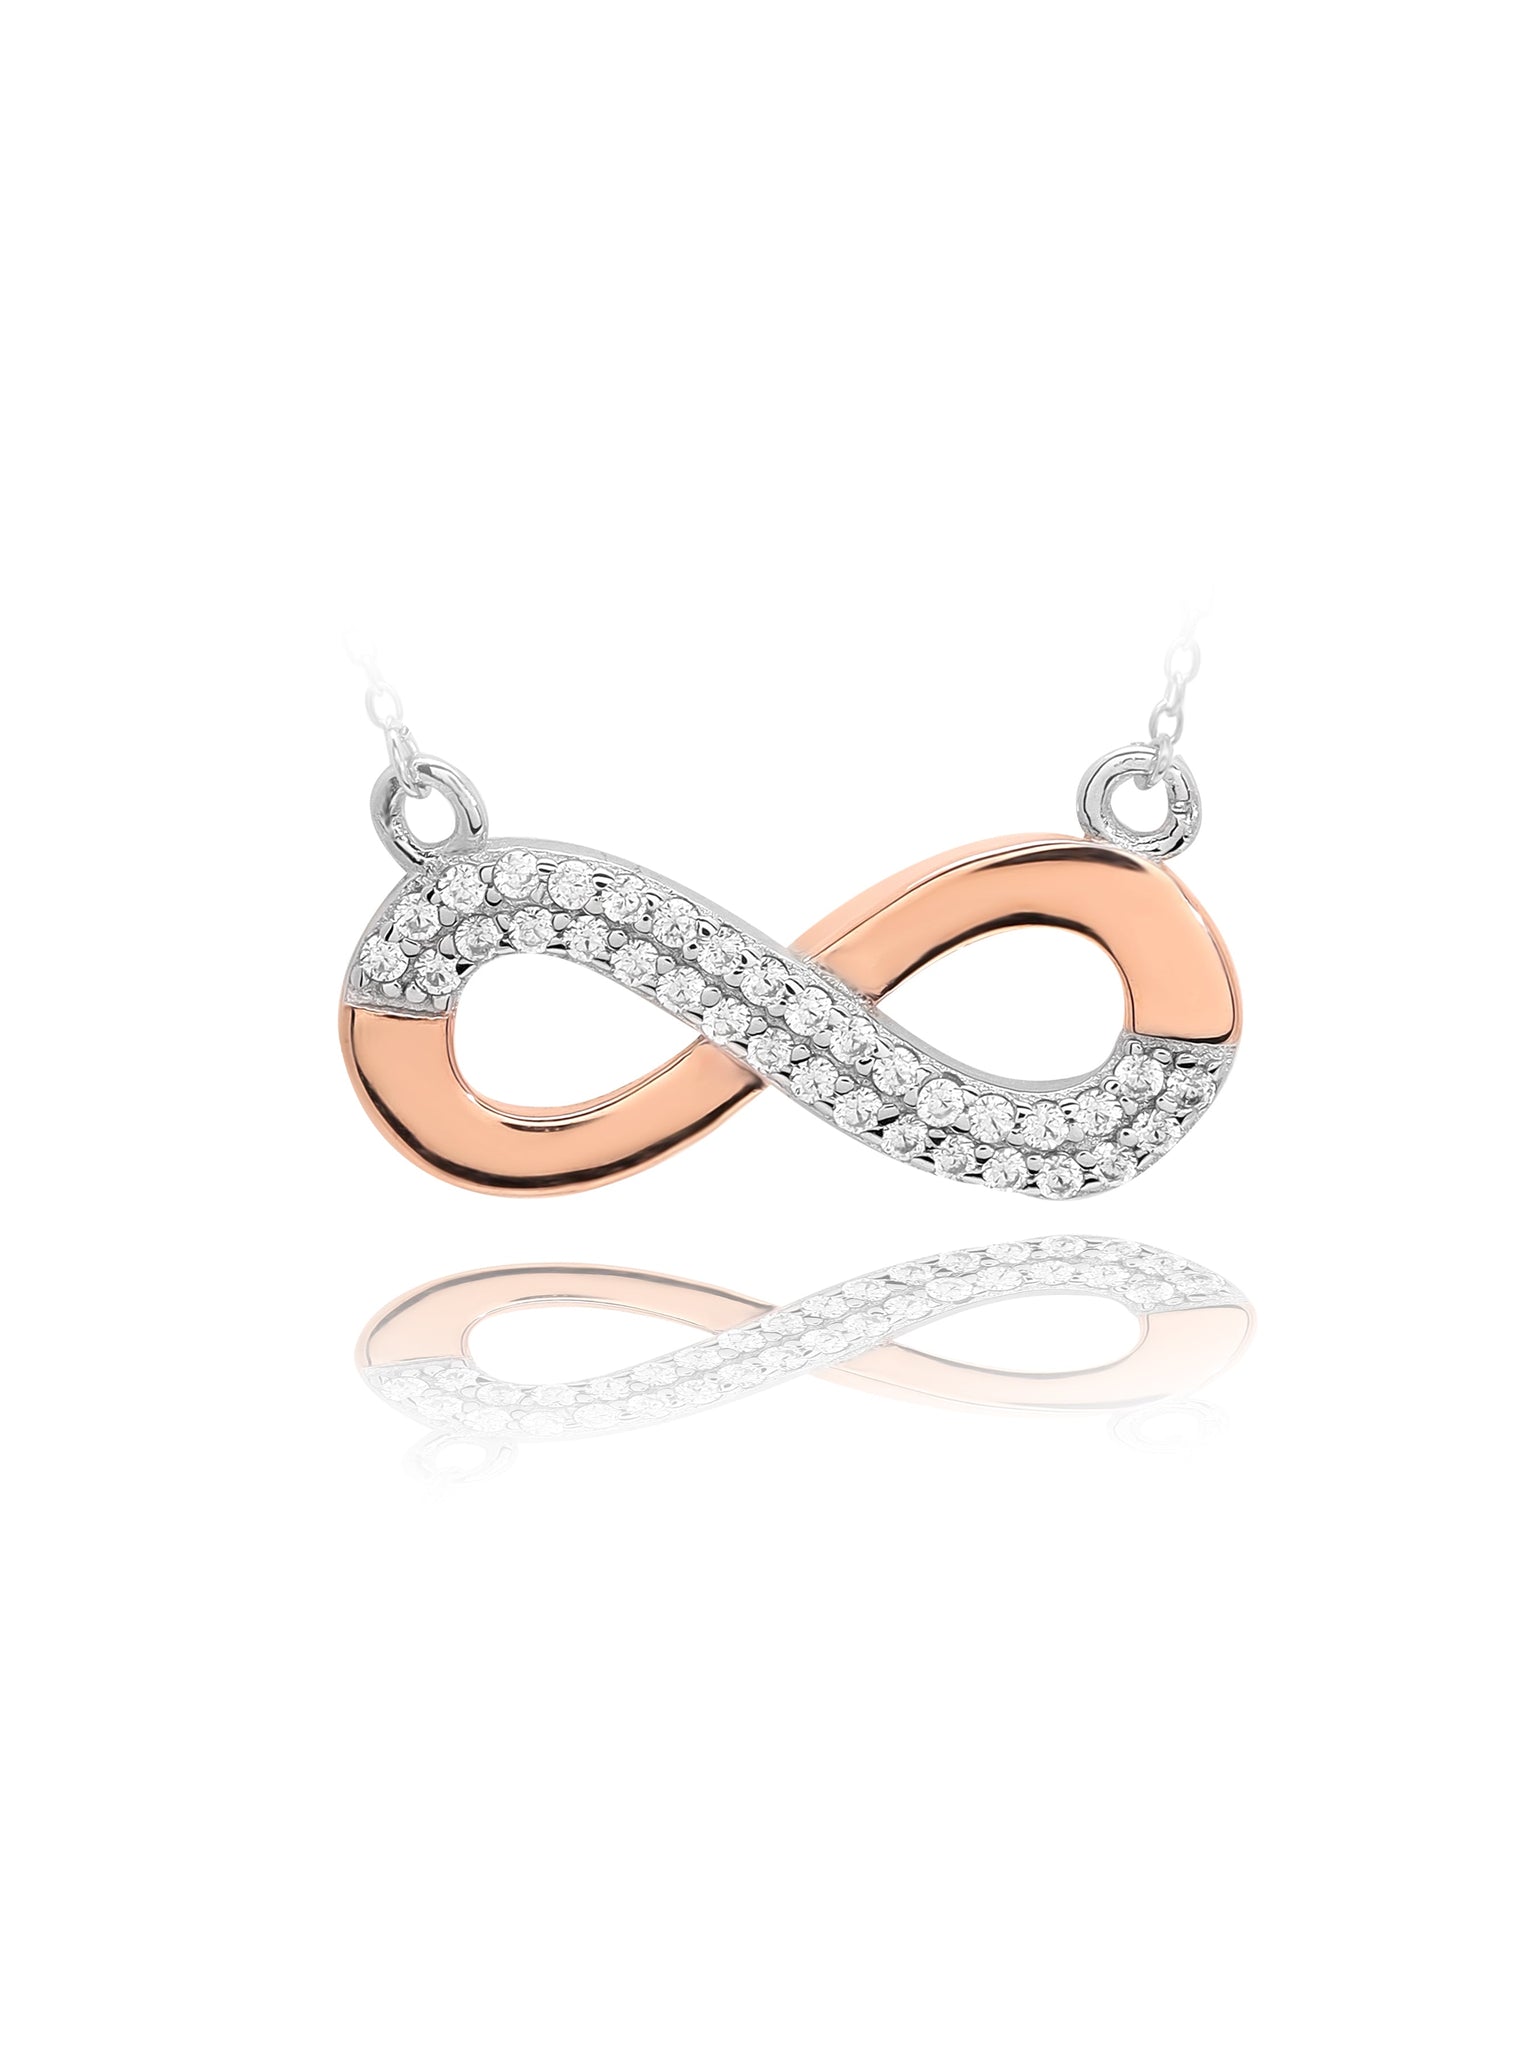  925 Silver Infinity Rose Gold Pendant Studded With Zirconia Necklace